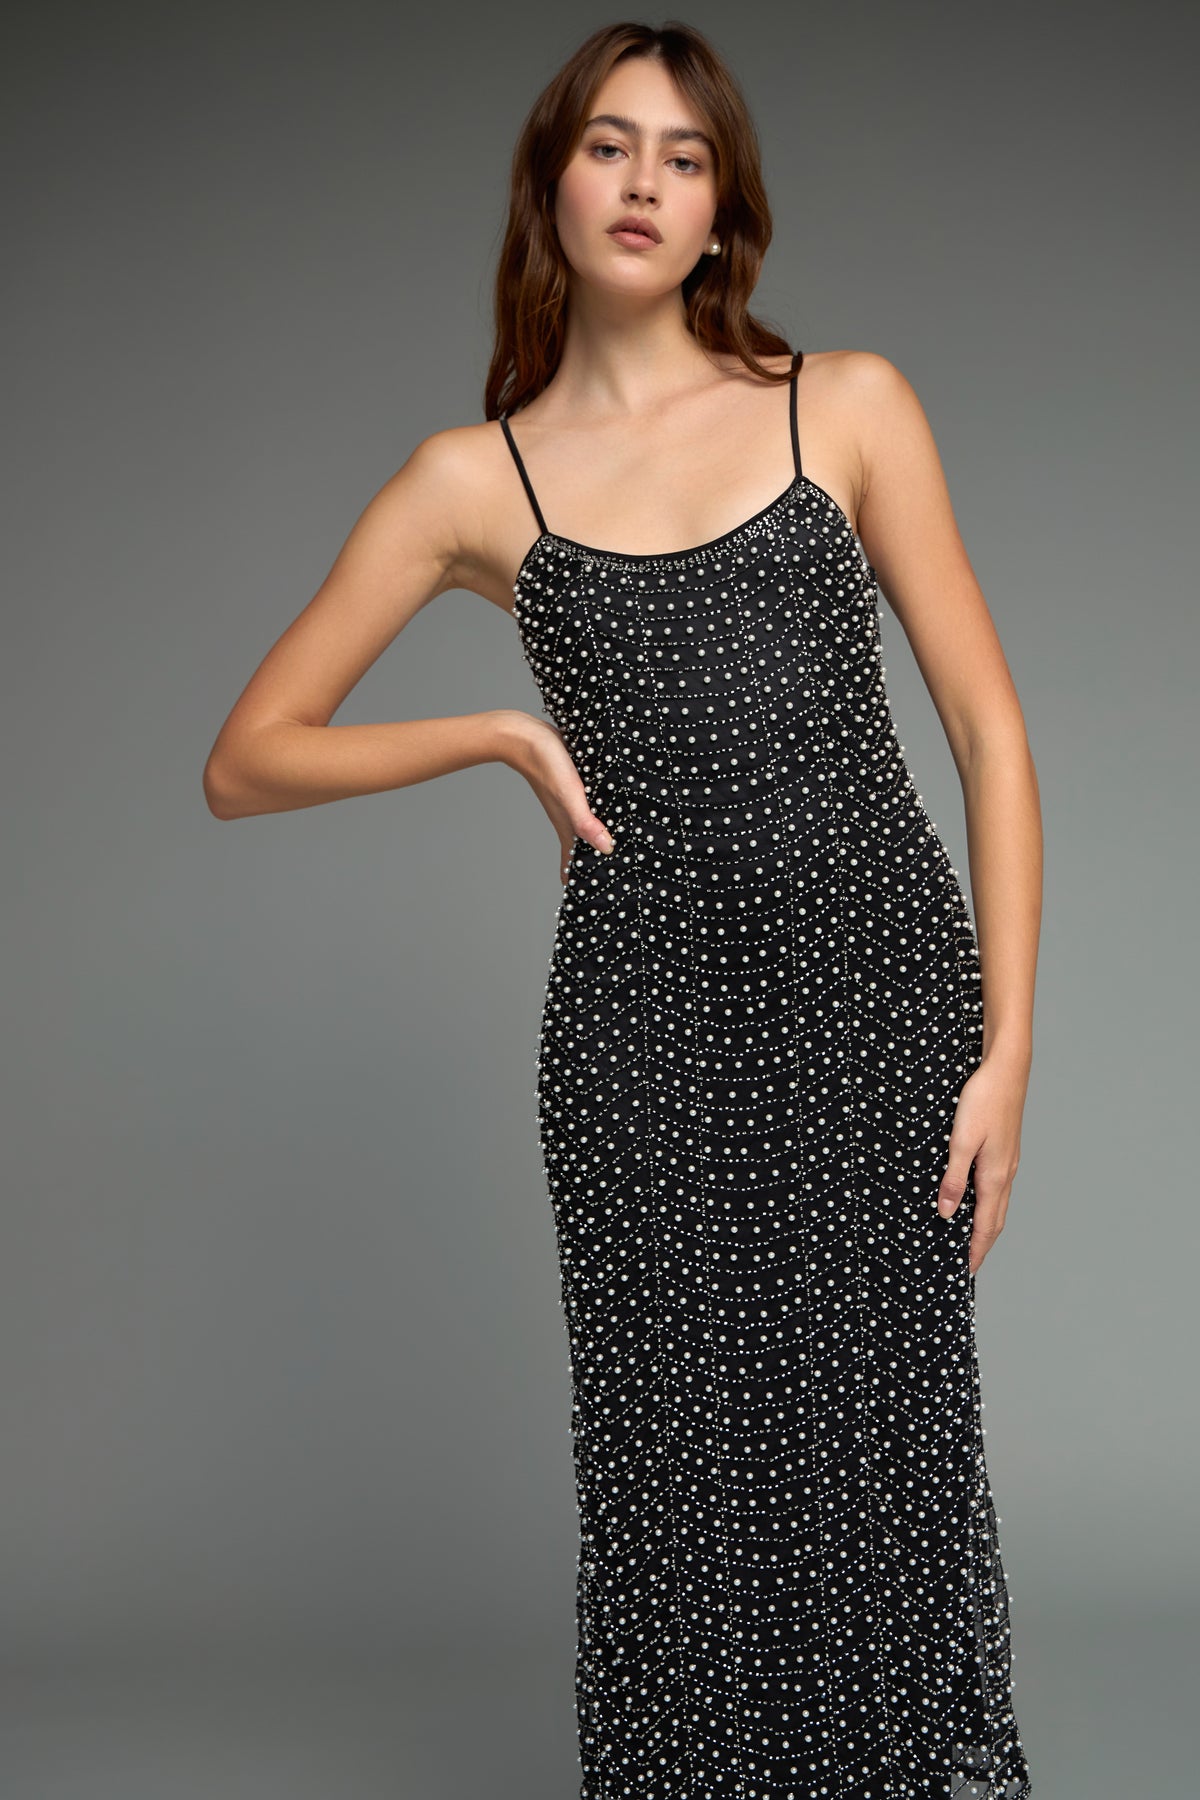 ENDLESS ROSE - Premium Pearl Beaded Maxi Dress - DRESSES available at Objectrare